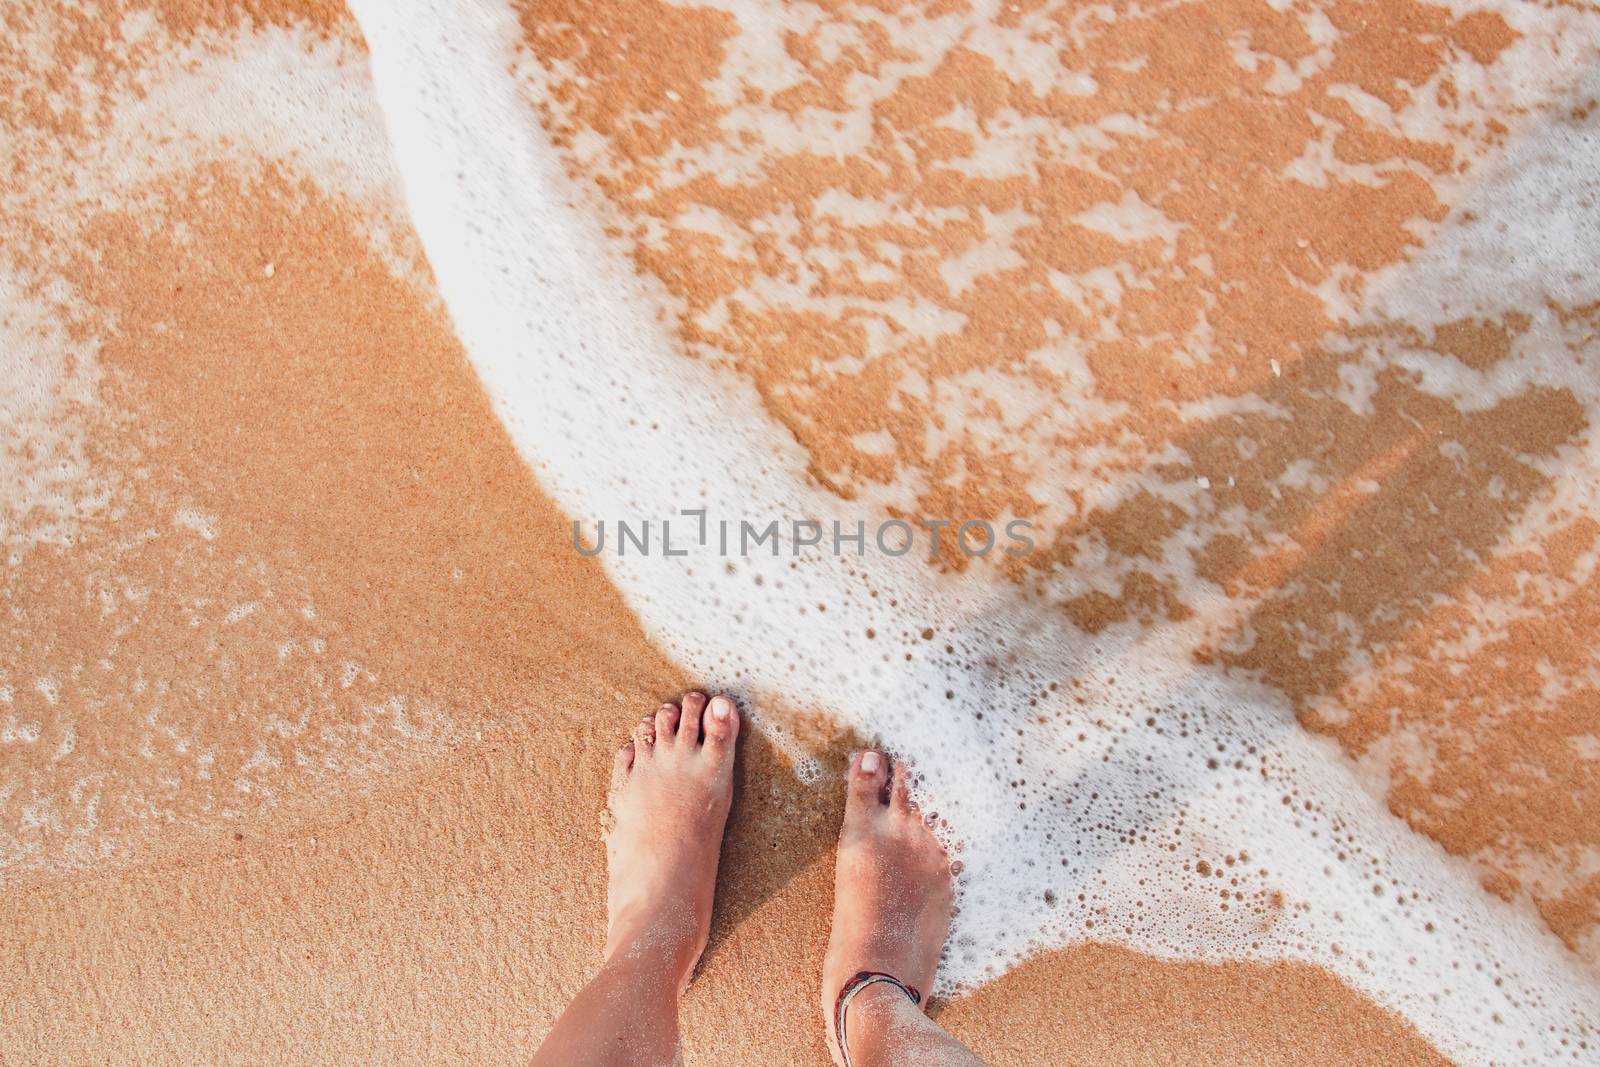 Standing on the beach with feet soaked in the waves showing the summer feeling and being one with nature